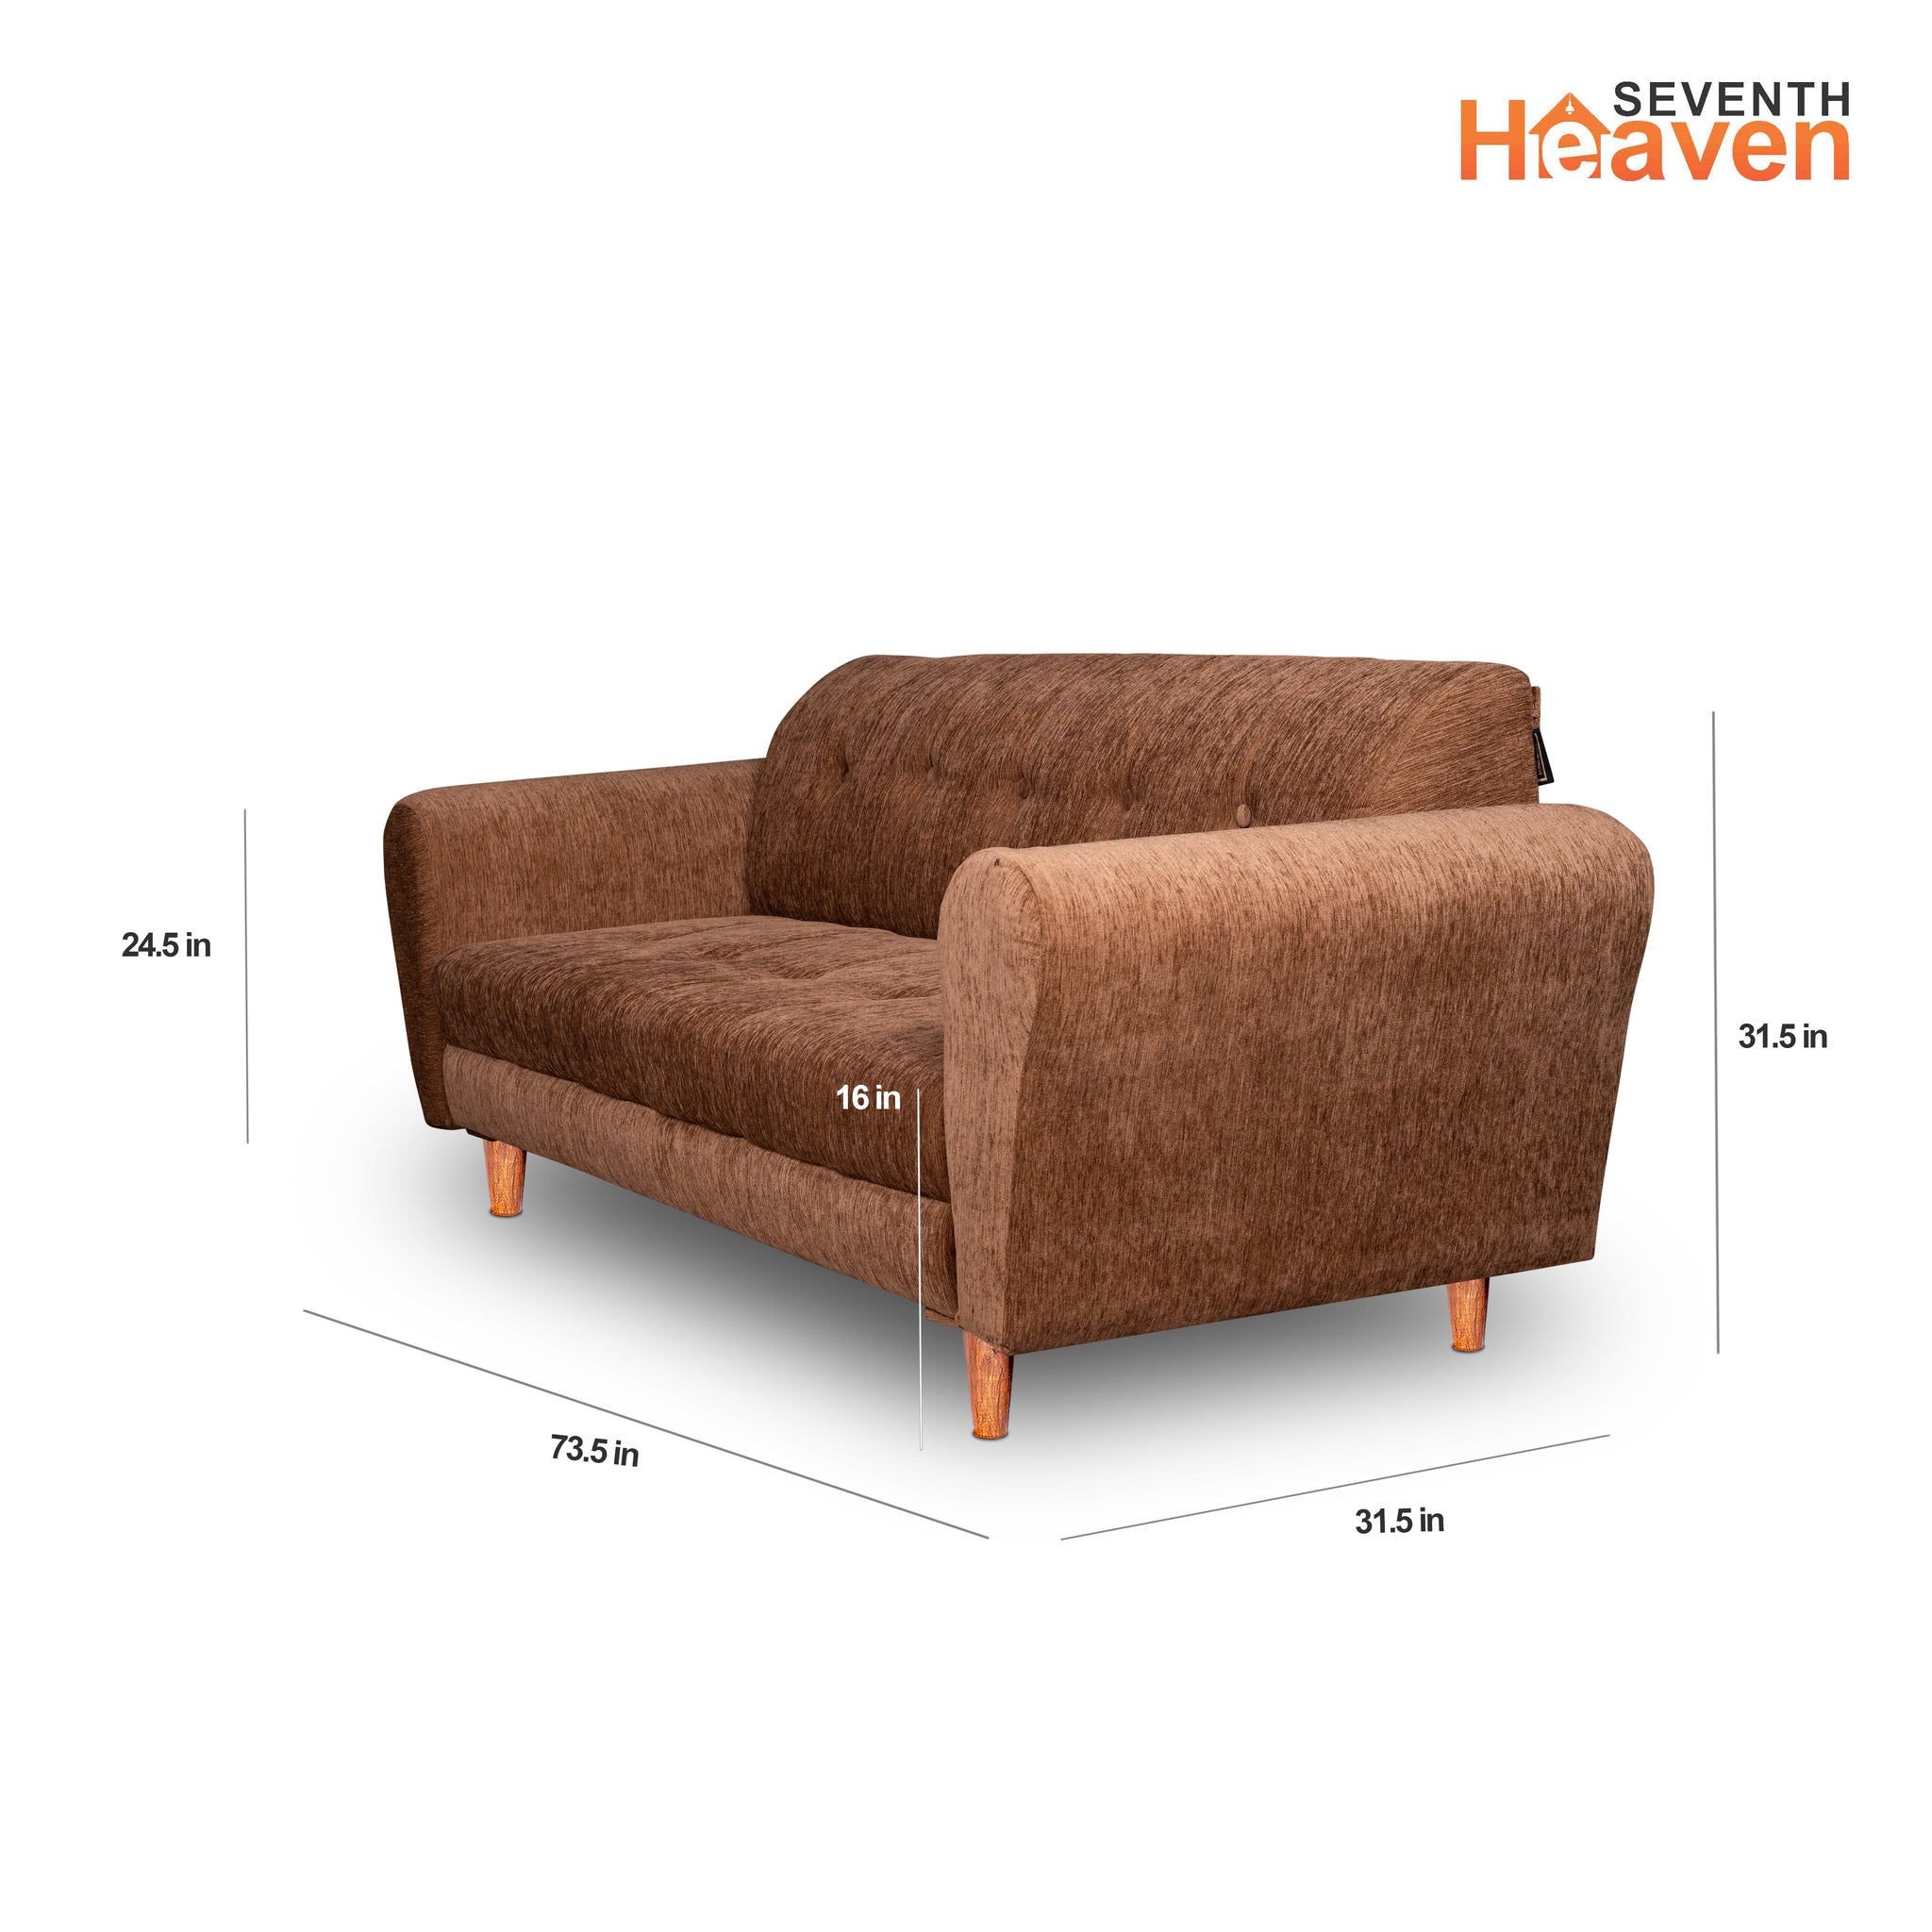 Seventh Heaven Milan 3 Seater Wooden Sofa Set Modern & Elegant Smart Furniture Range for luxurious homes, living rooms and offices. Beige Colour Molphino fabric with sheesham polished wooden legs. Product dimensions are also mentioned.